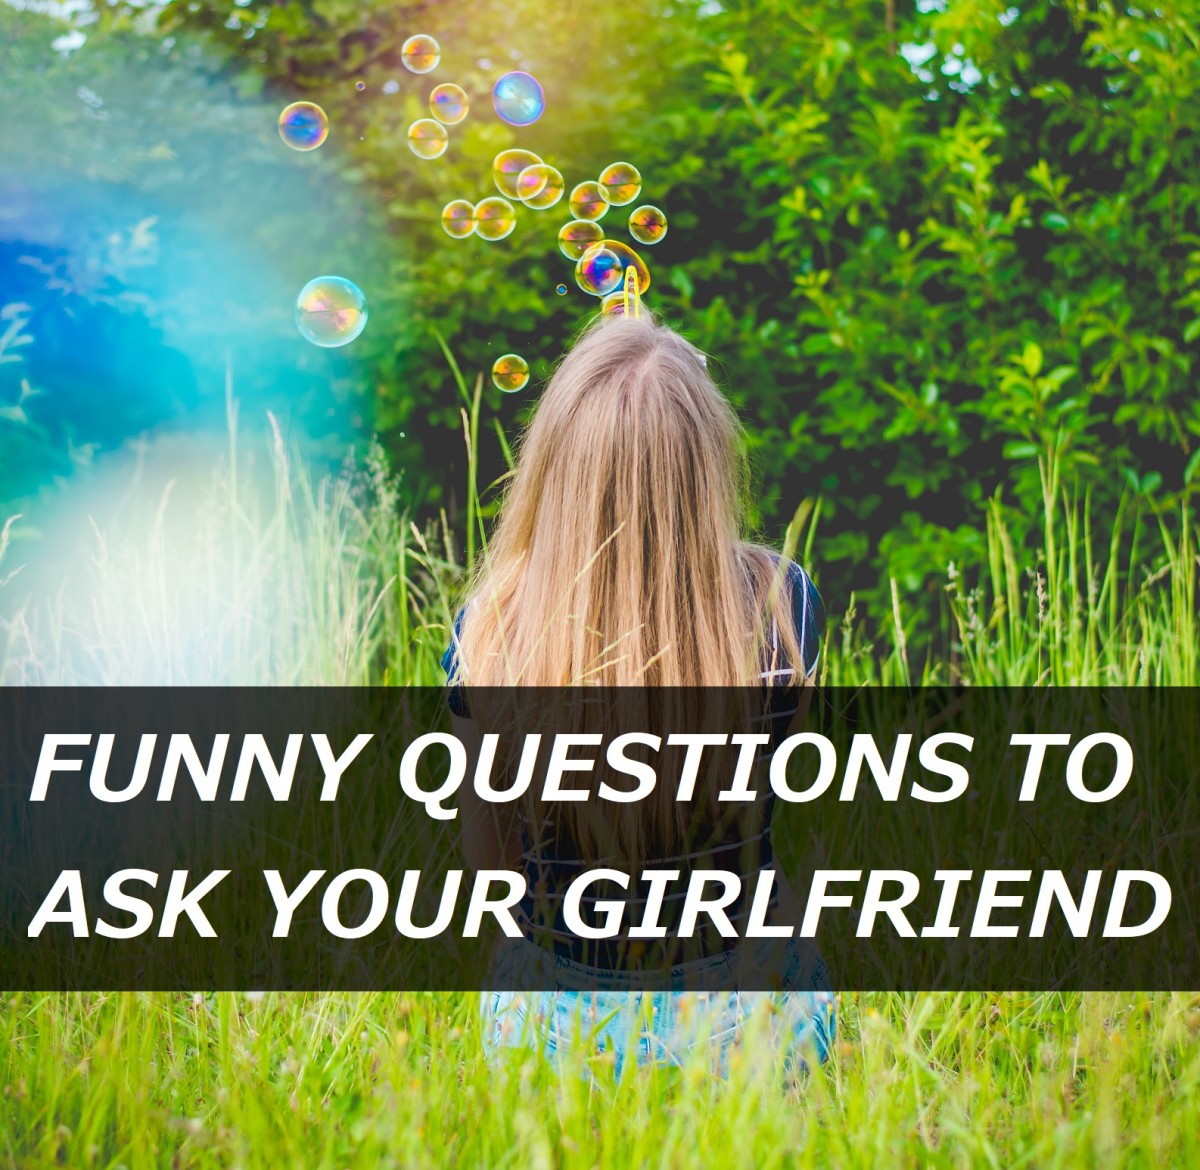 The dating game questions funny